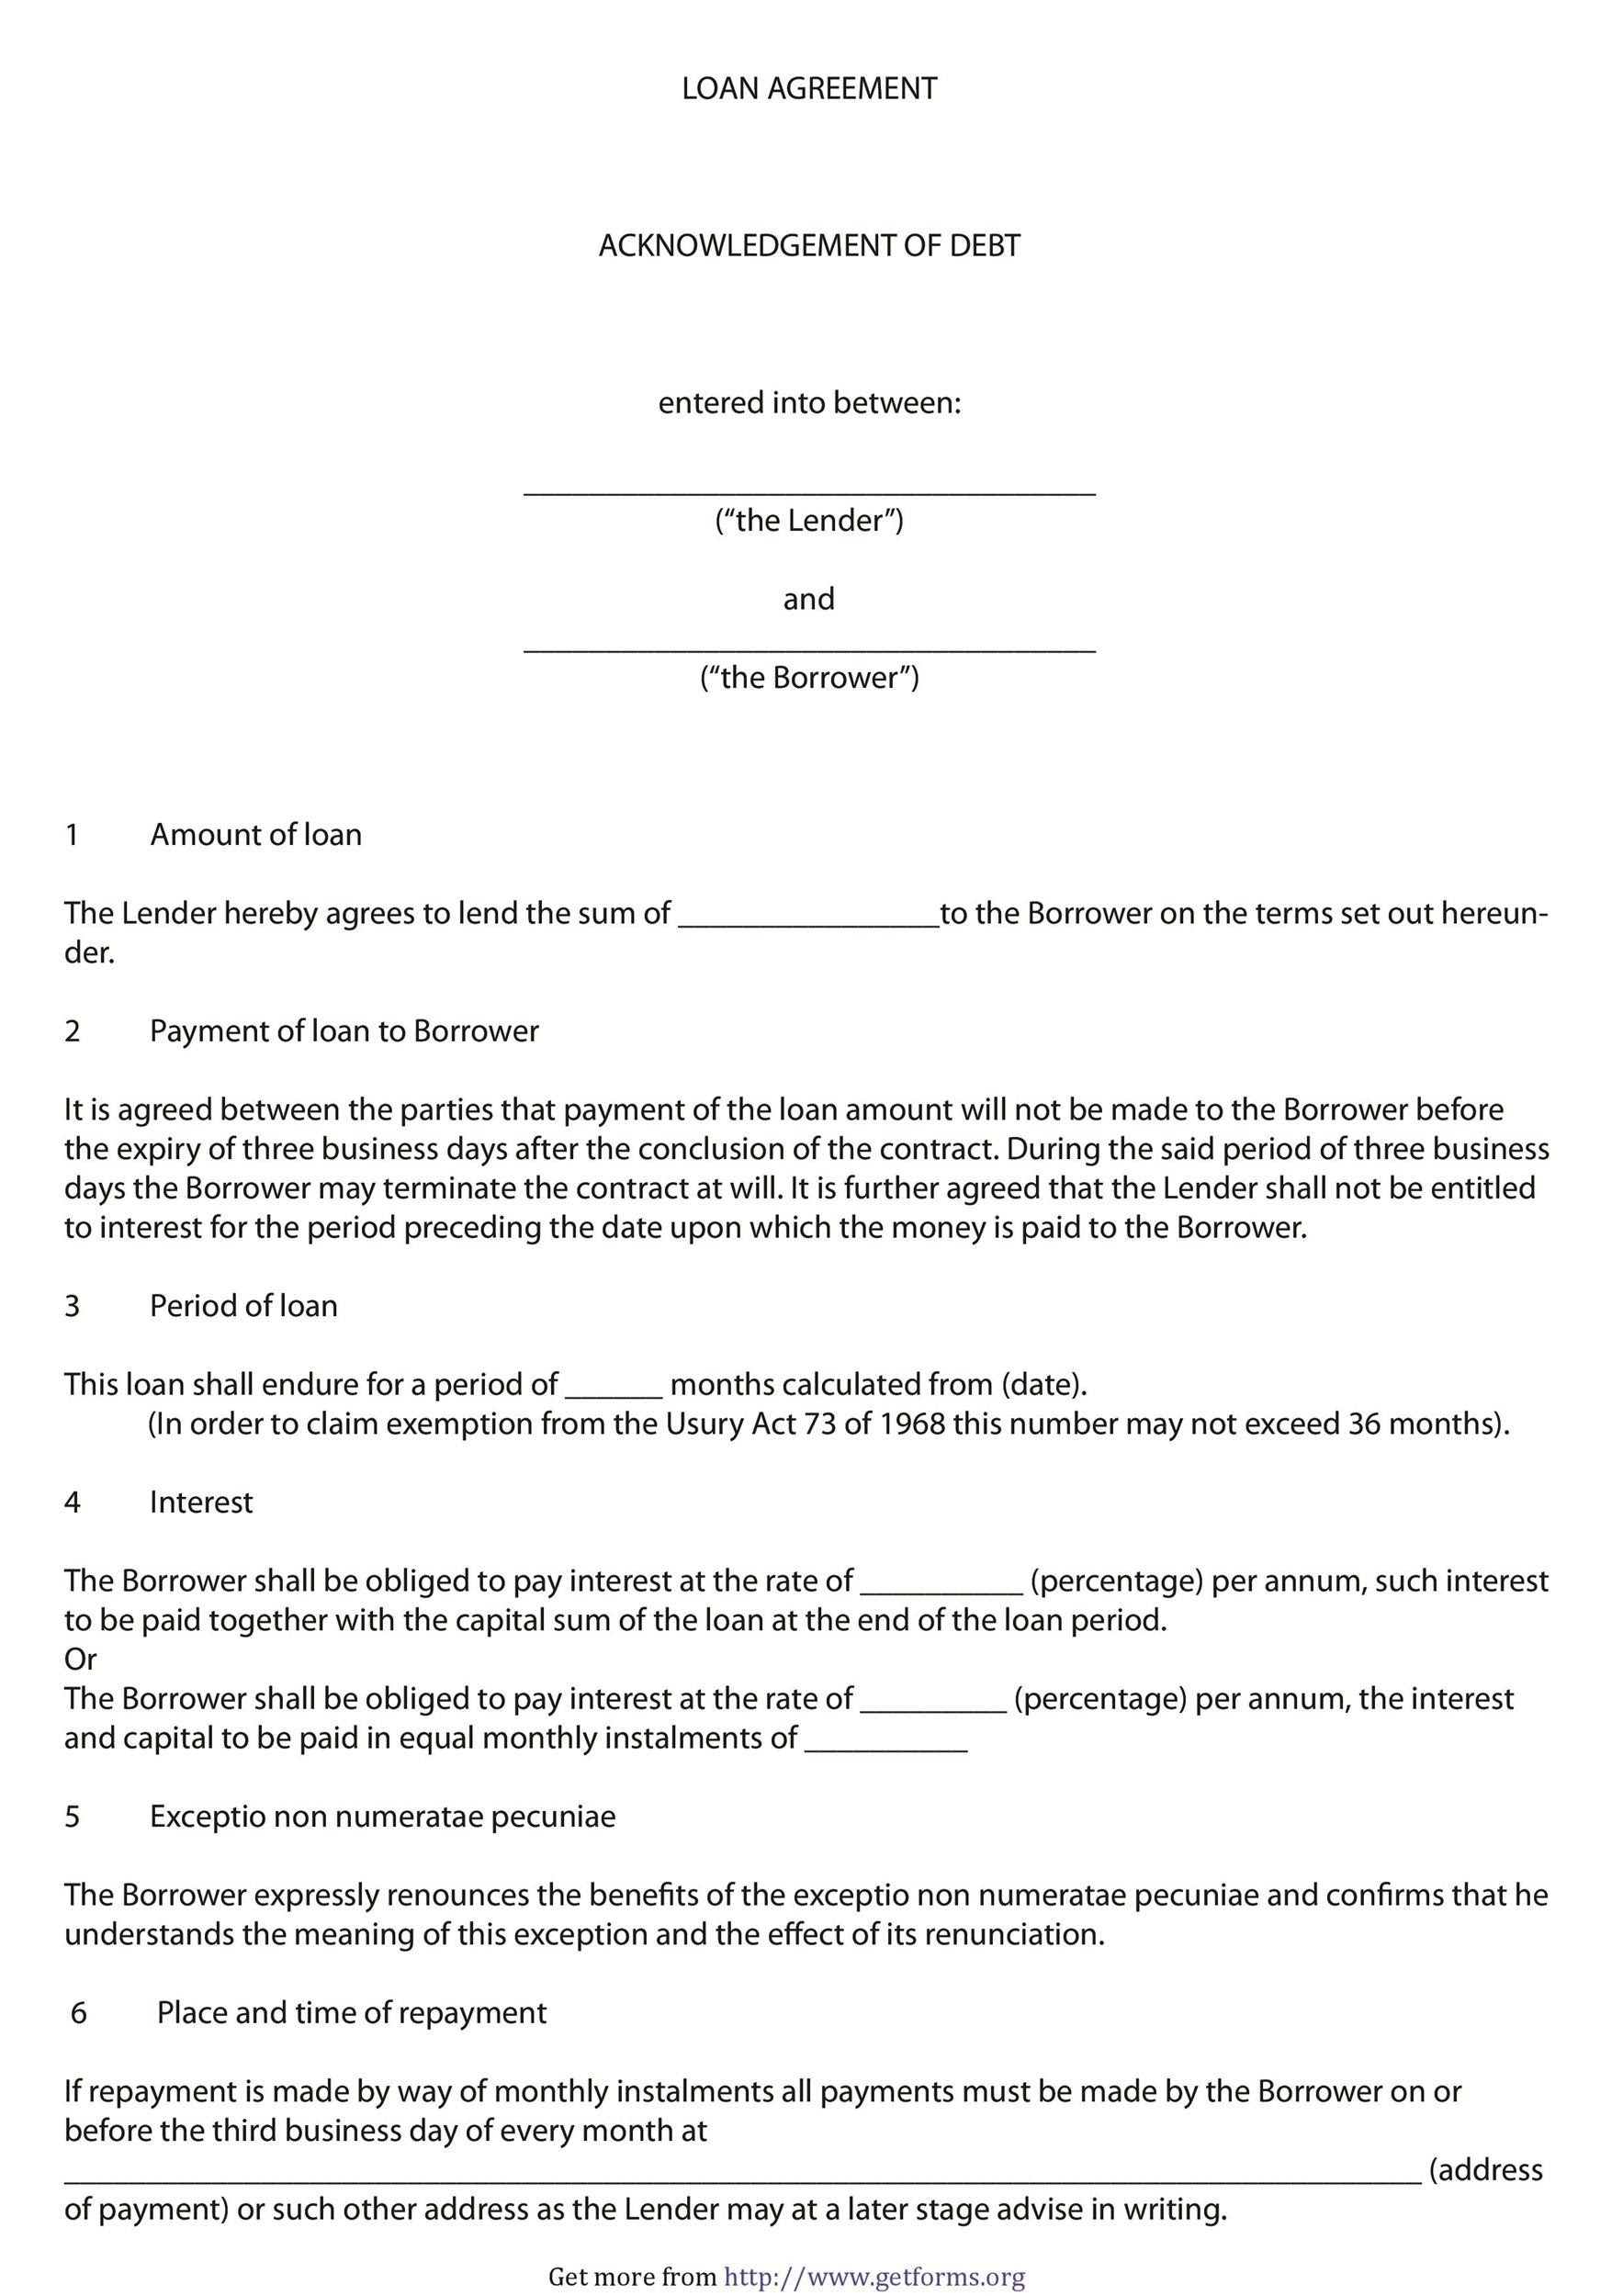 57-pdf-a-loan-agreement-template-free-printable-docx-download-zip